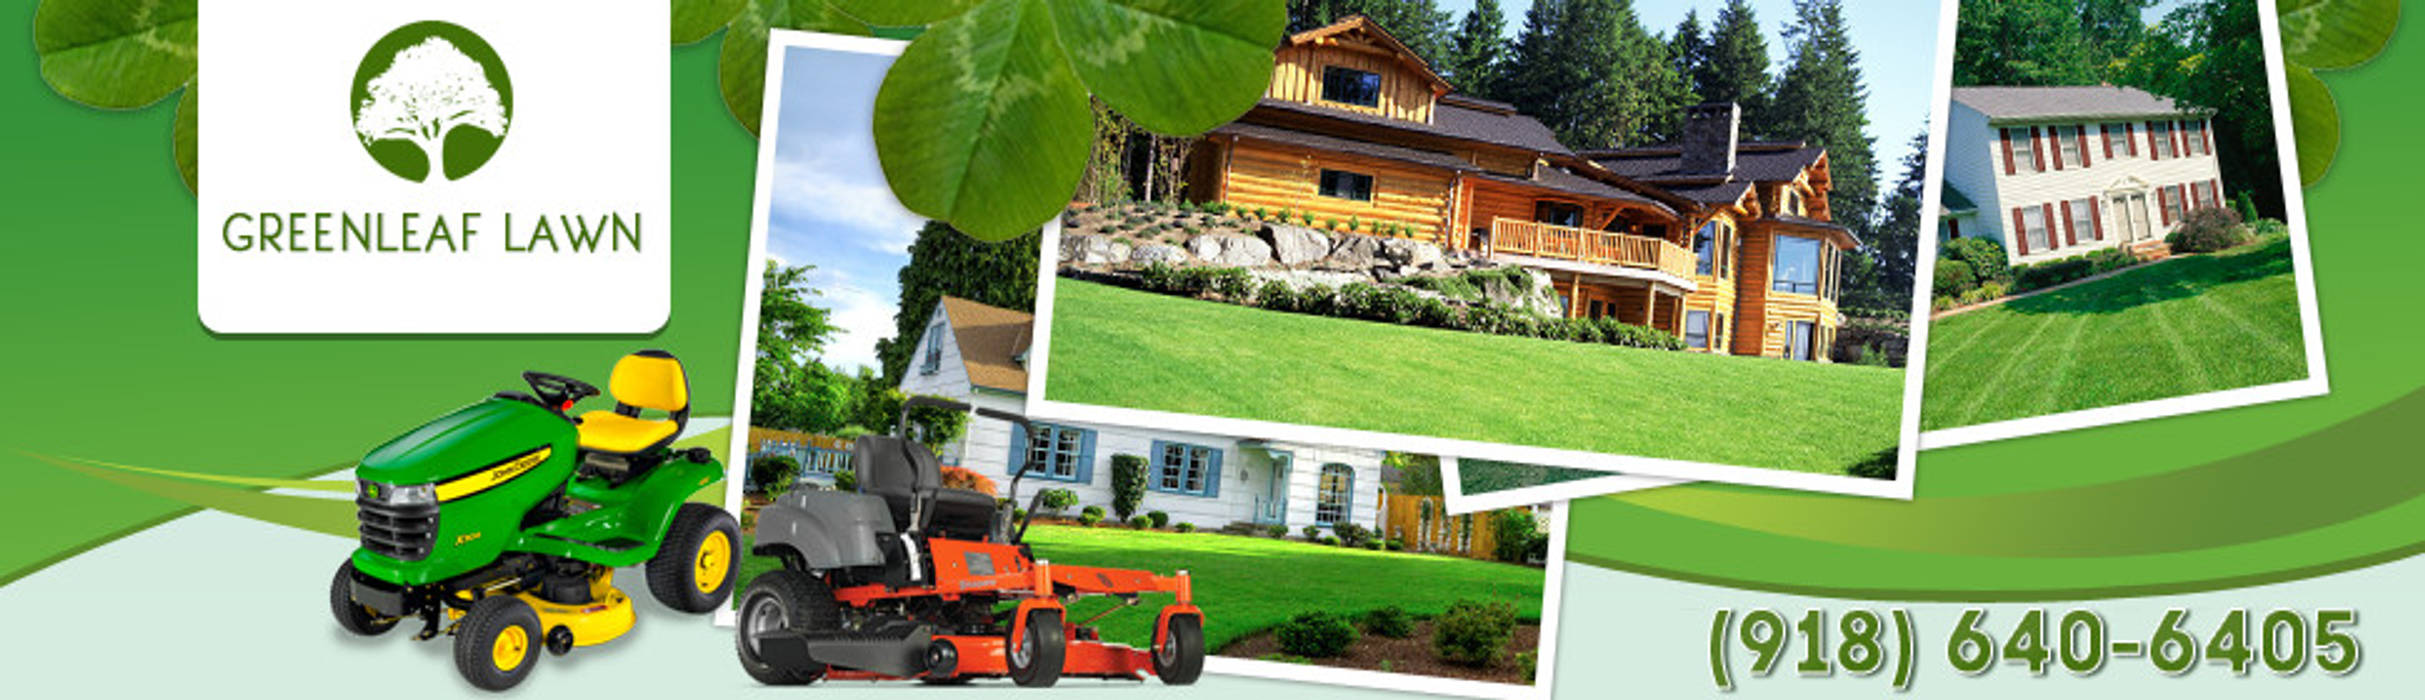 Main Reasons To Get Professional Lawn Care Services, Real Estate Real Estate Classic style houses